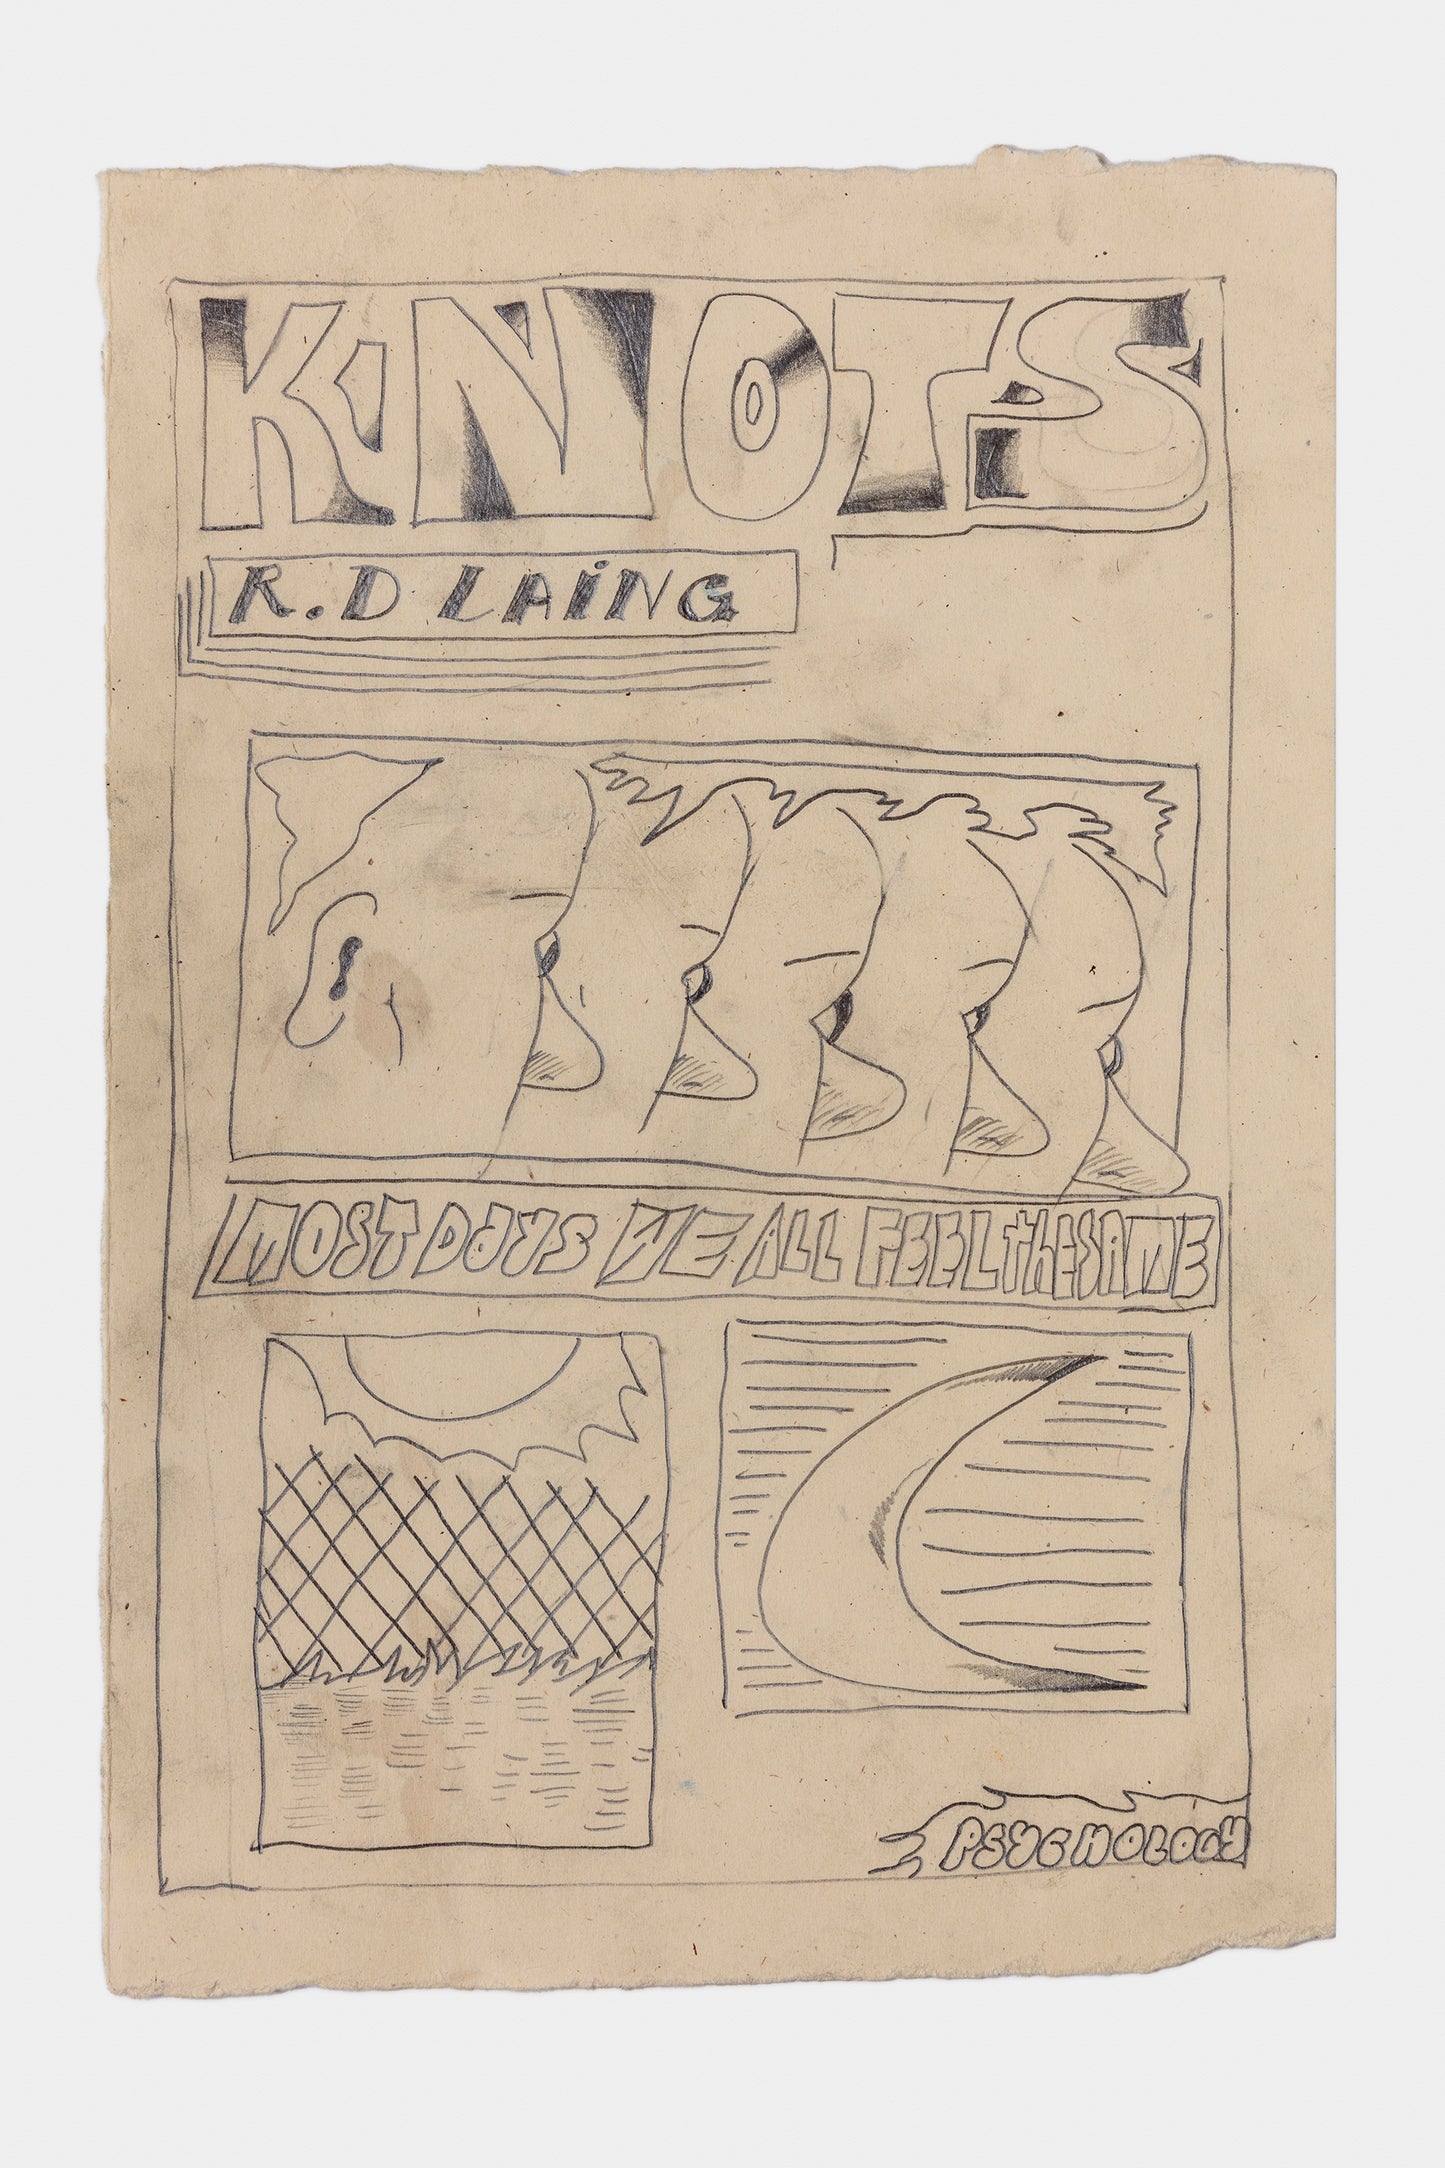 006 Knots By RD Laing